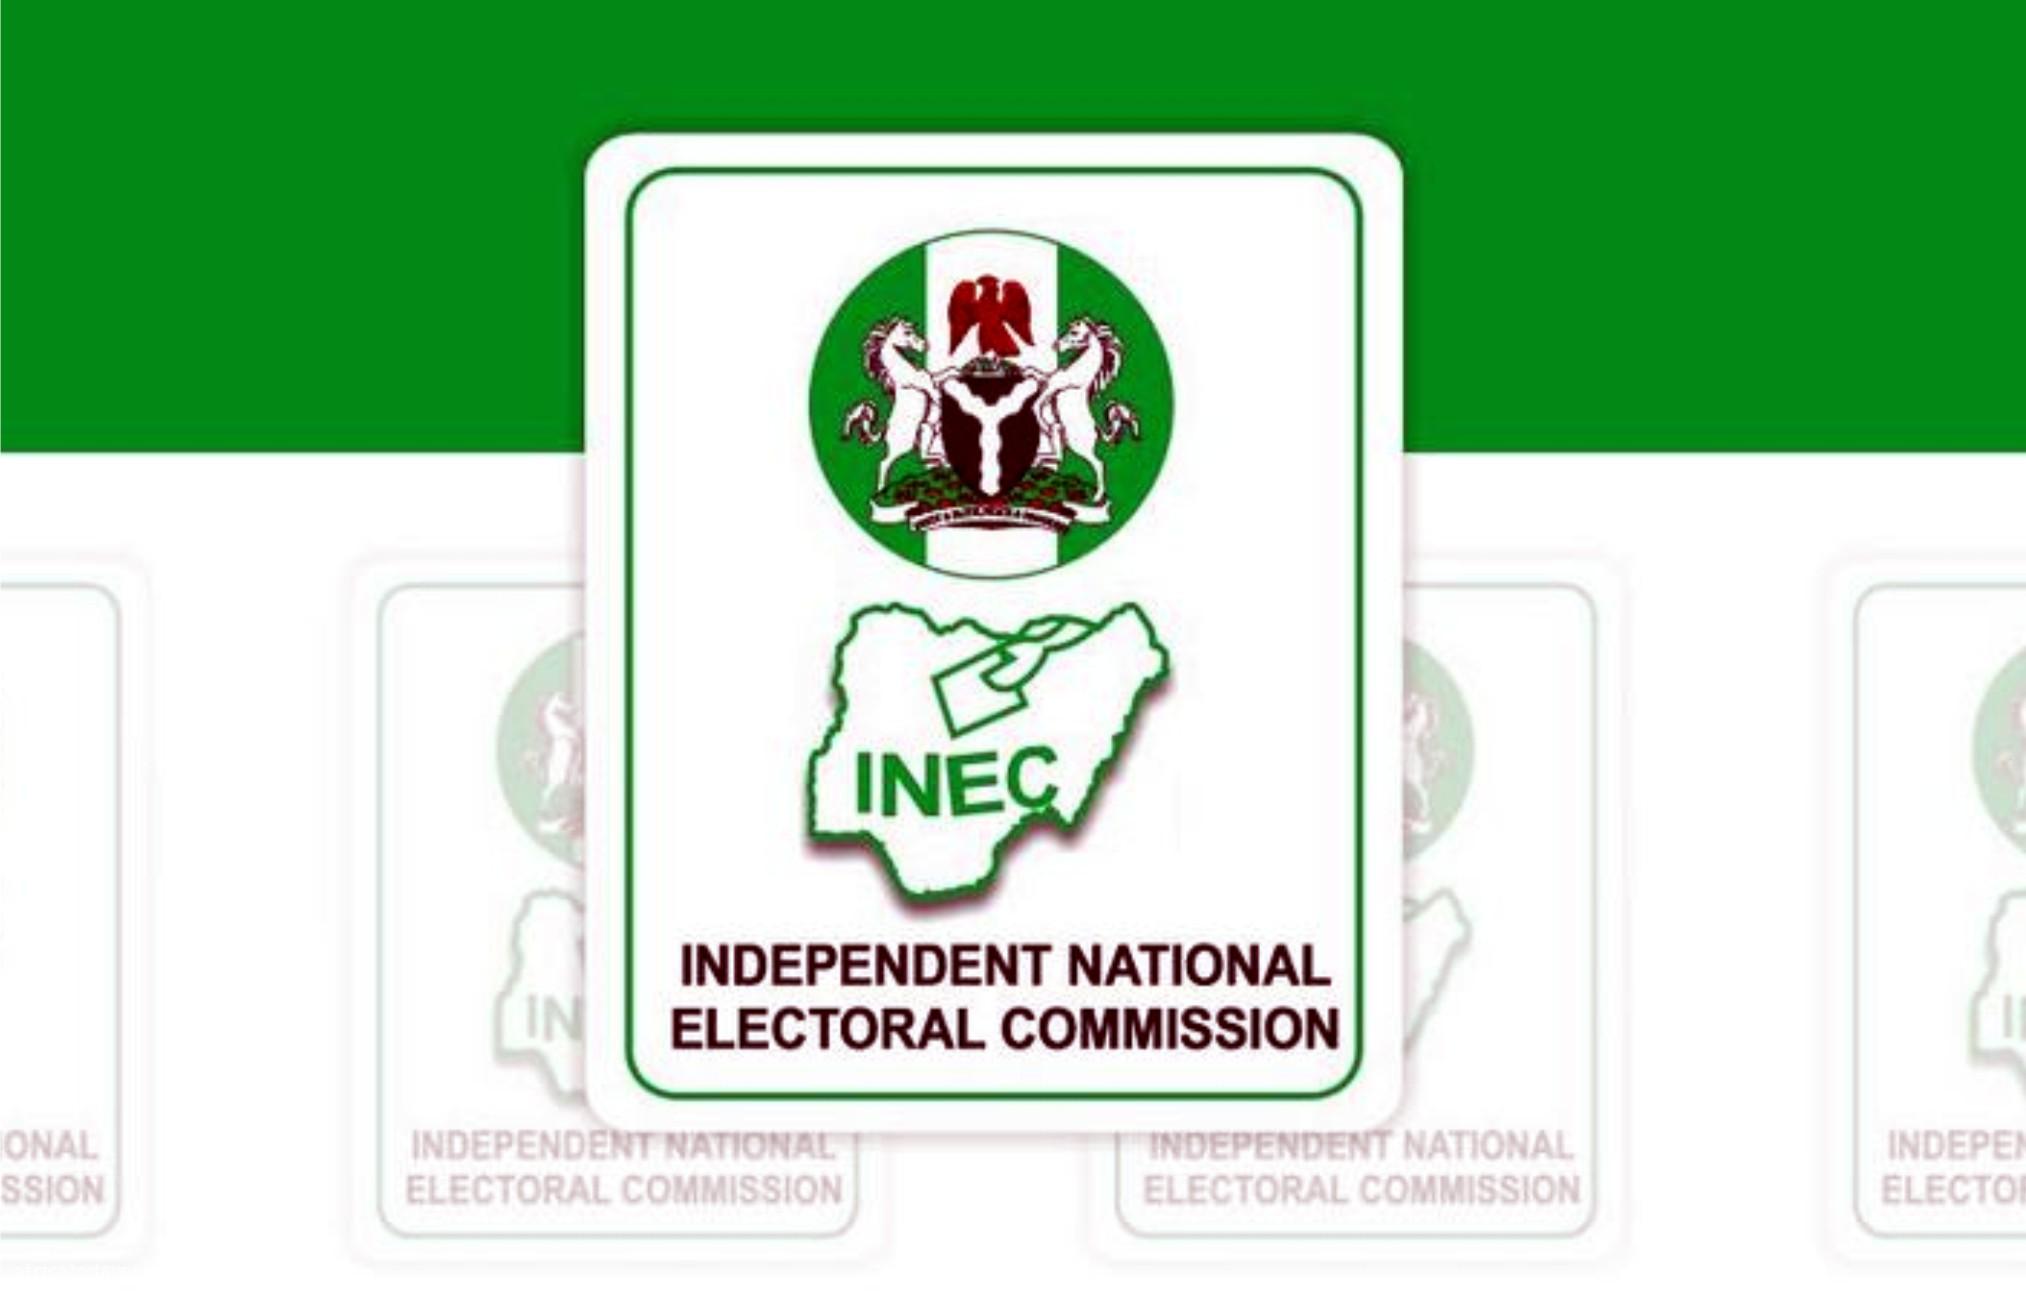 INEC Will Implement Use Of Better Technology - Prof Gumus